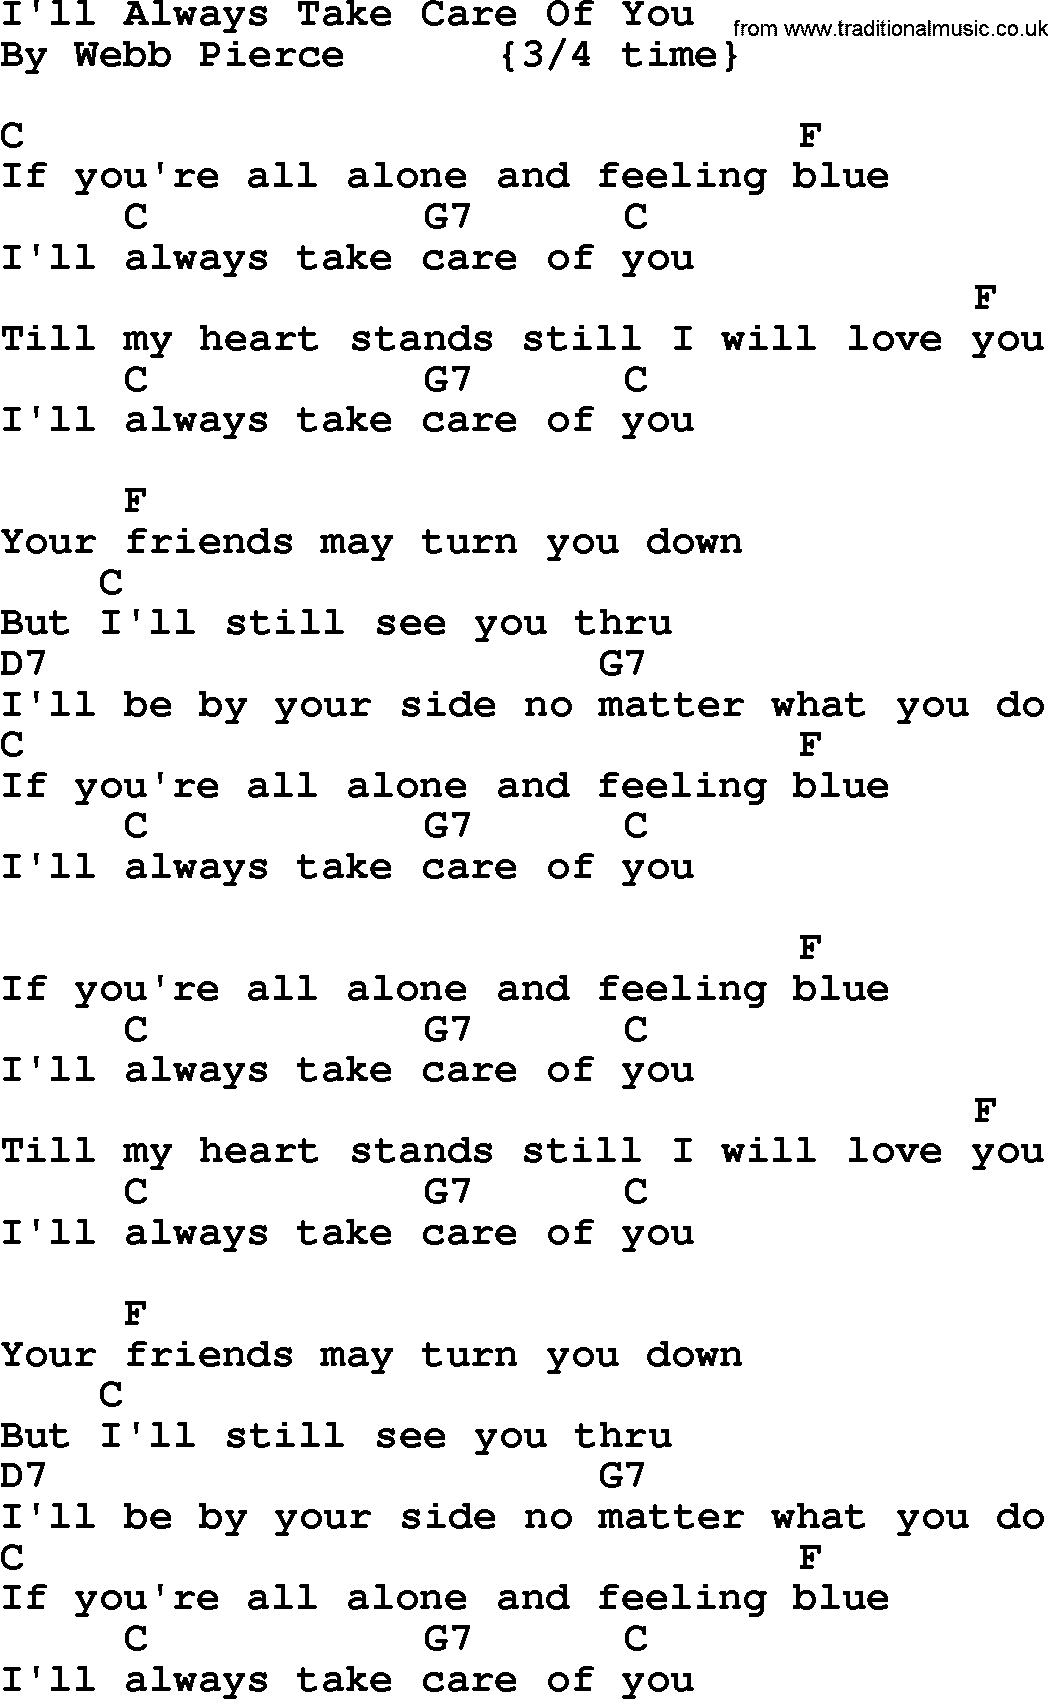 Country music song: I'll Always Take Care Of You lyrics and chords